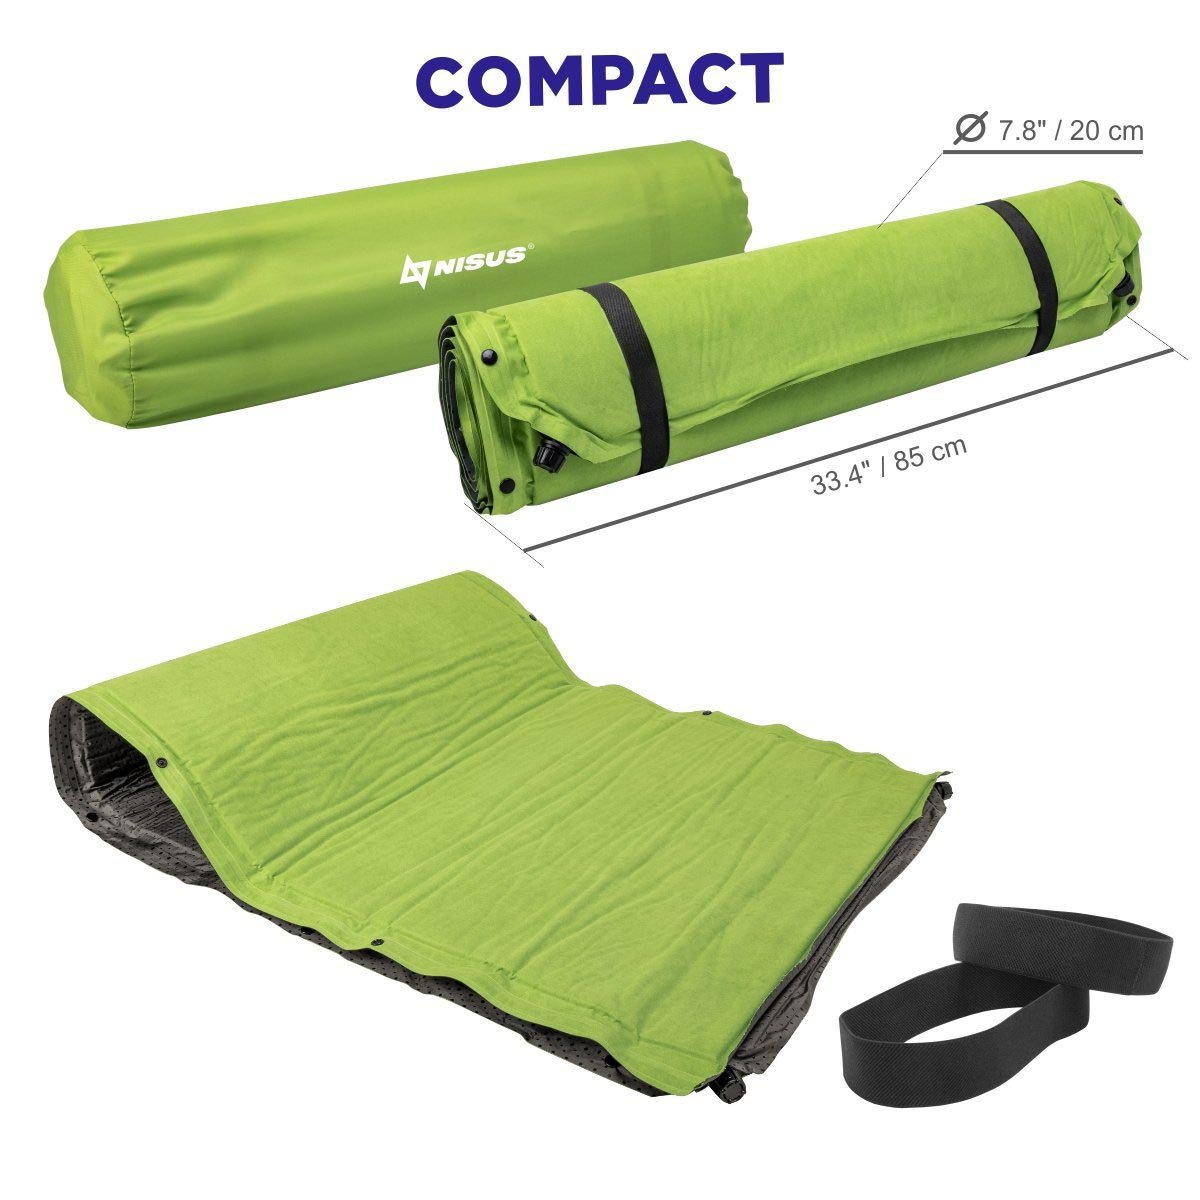 2-inch Lightweight Self Inflating Camping Sleeping Pad is stored in a travel case